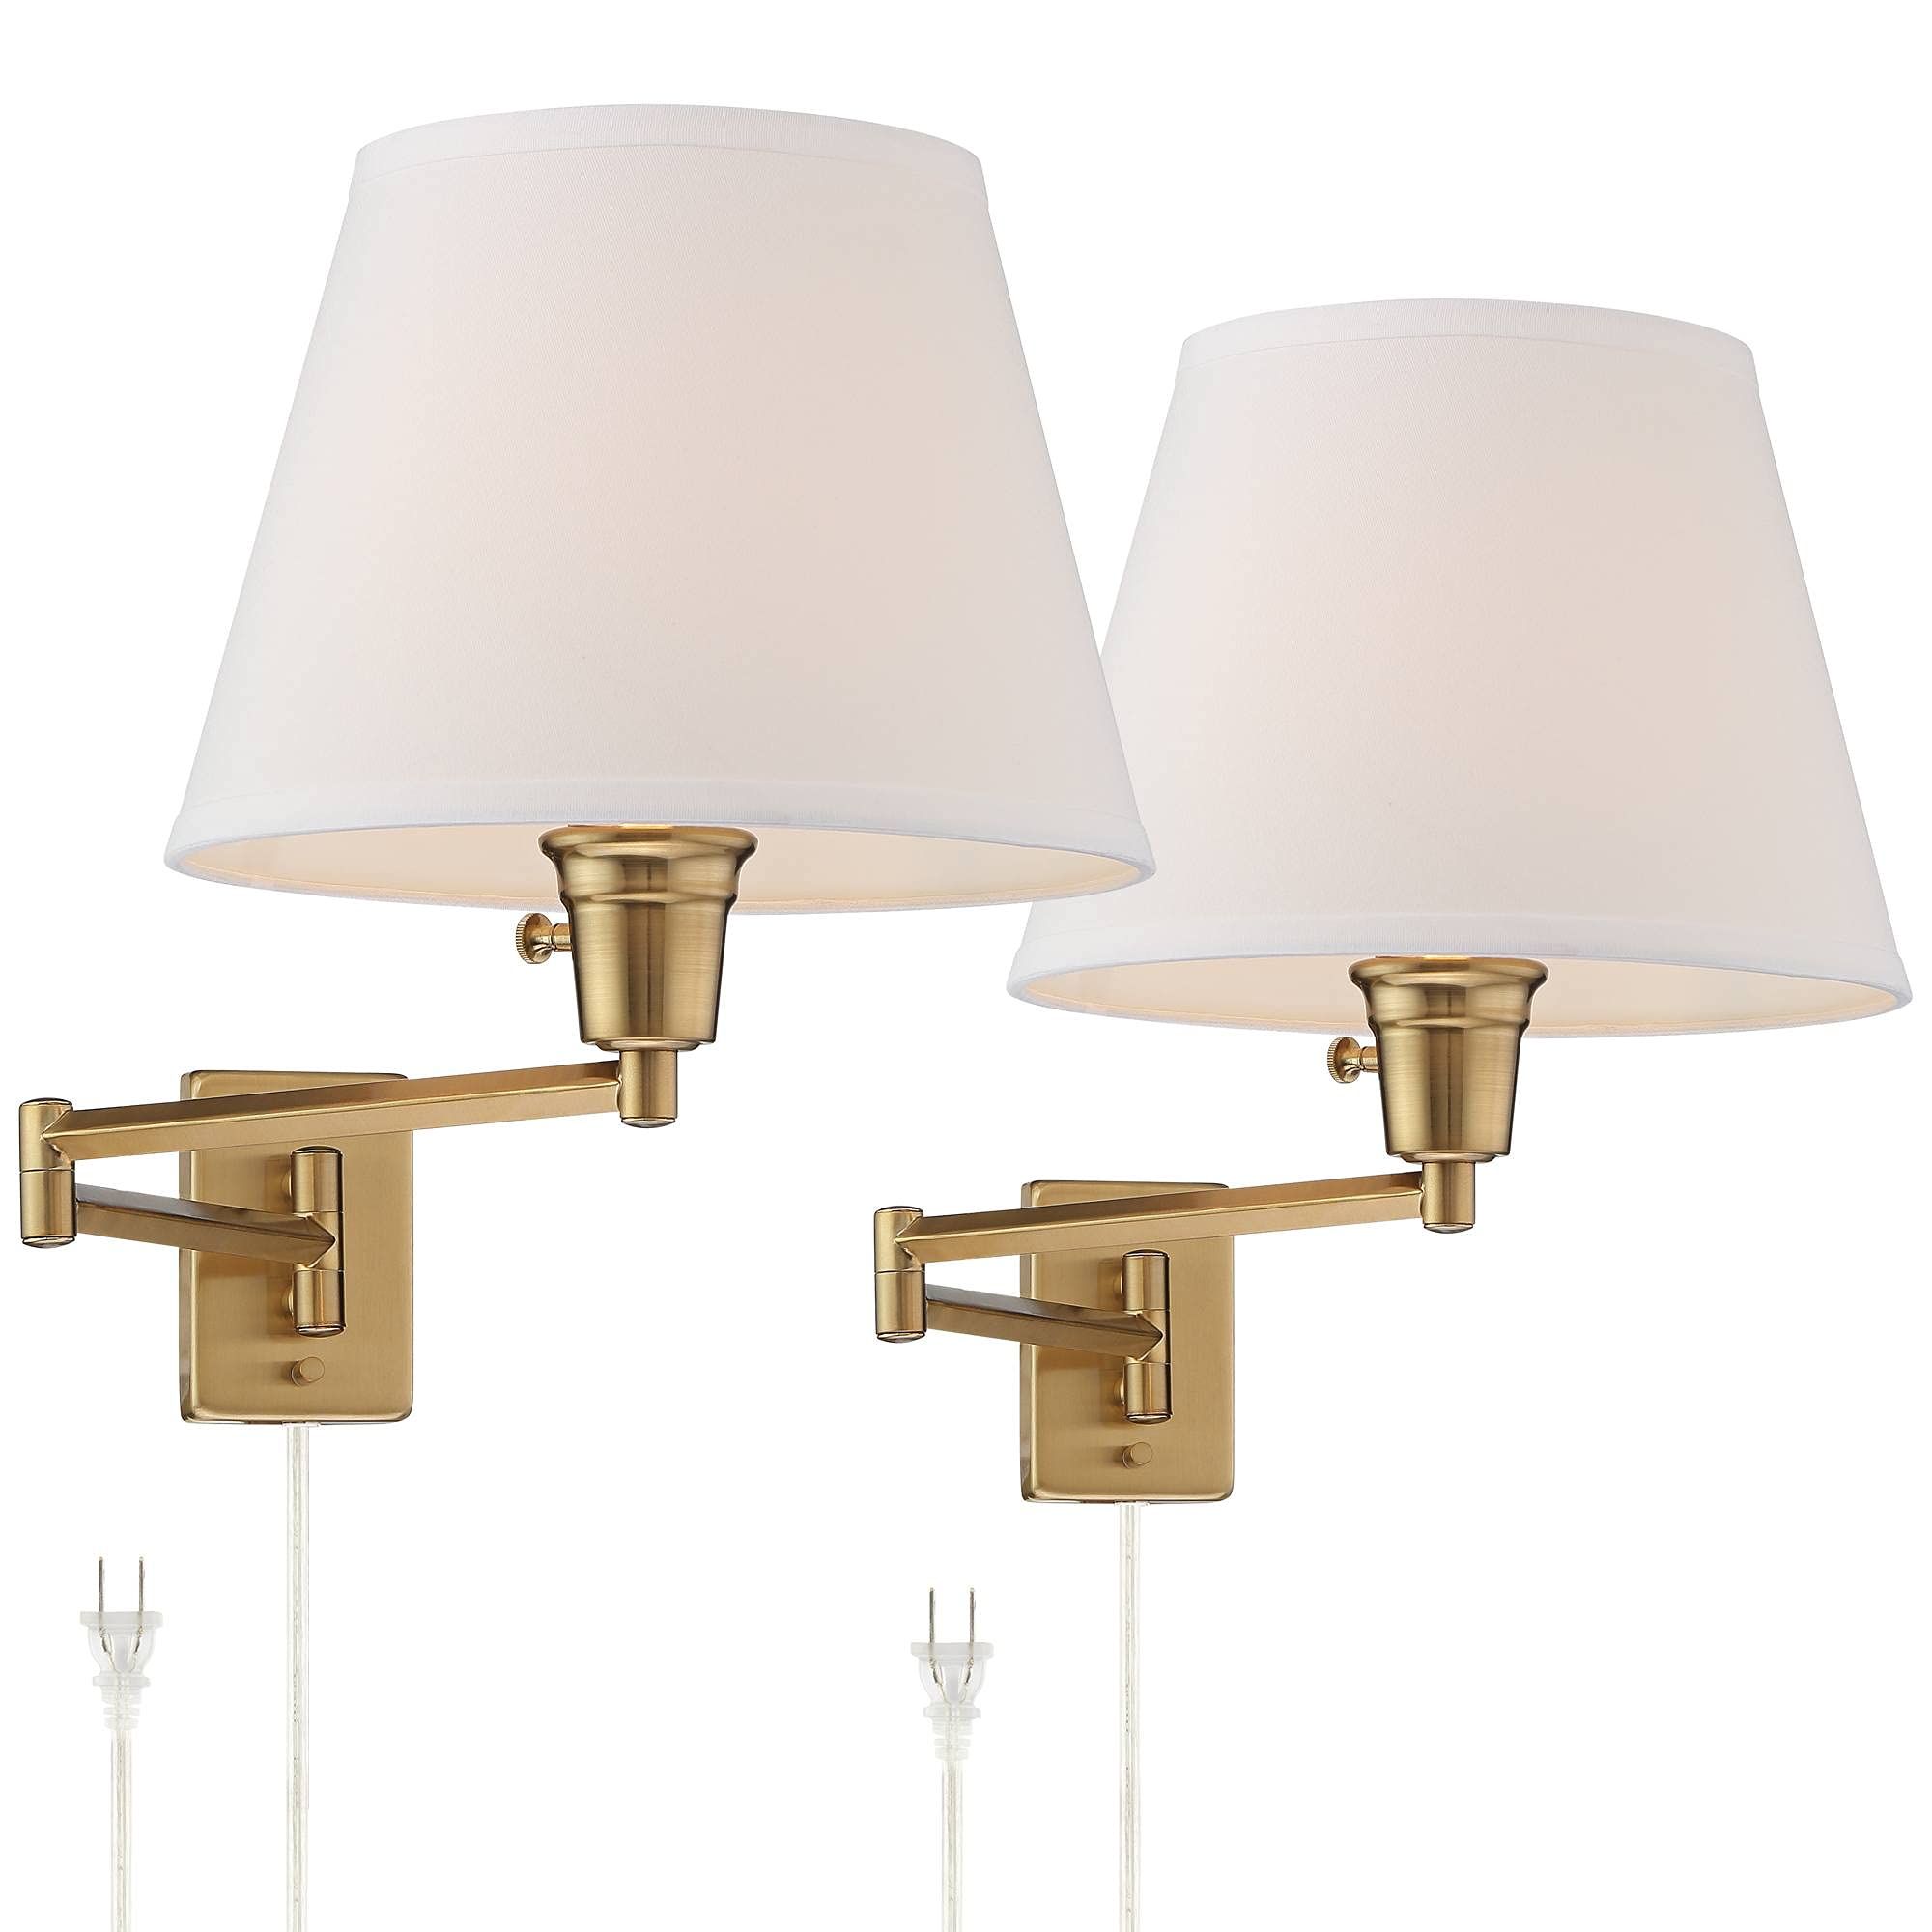 Clement Modern Swing Arm Wall Lamps Set of 2 Antique Brass Plug-in Light Fixture White Linen Hardbac | Amazon (US)